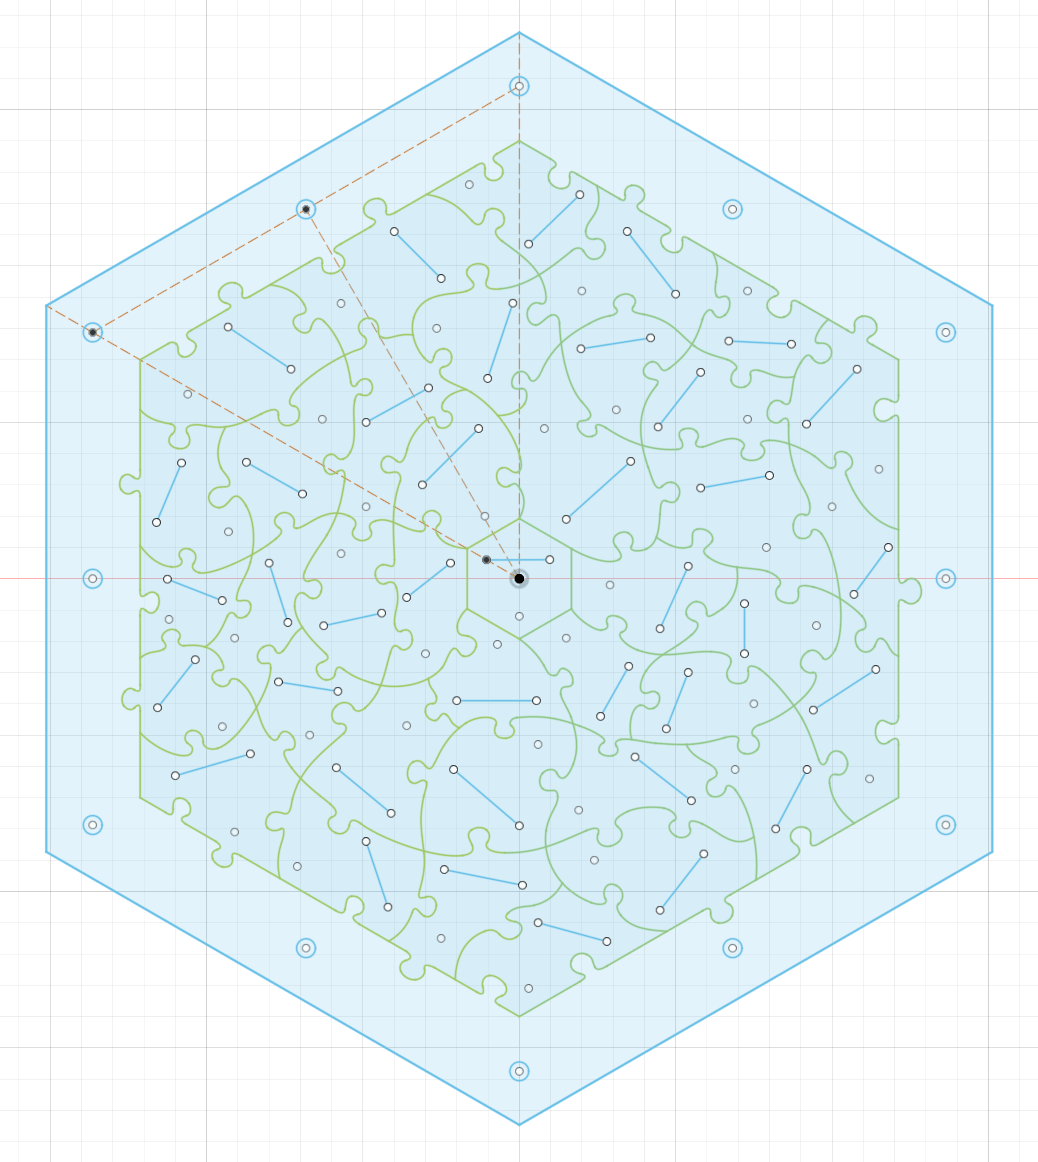 The design for the bottom plate of the puzzle with all the contact points